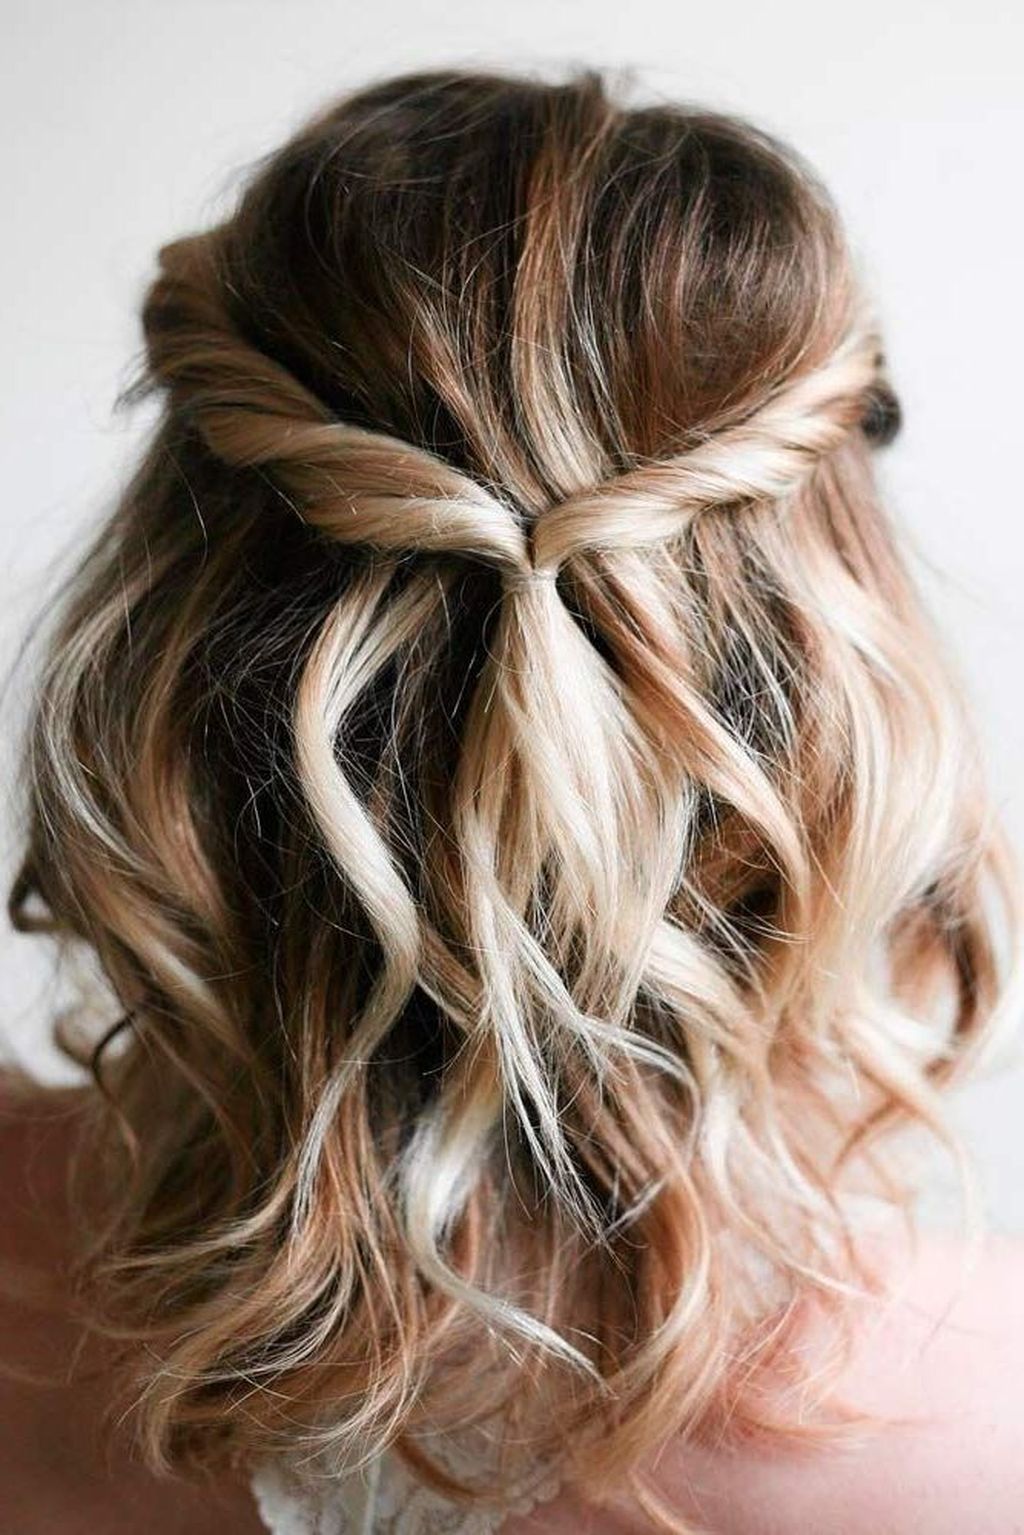 40+ Captivating Hairstyles Ideas For Work You Must Try -   12 hairstyles party ideas